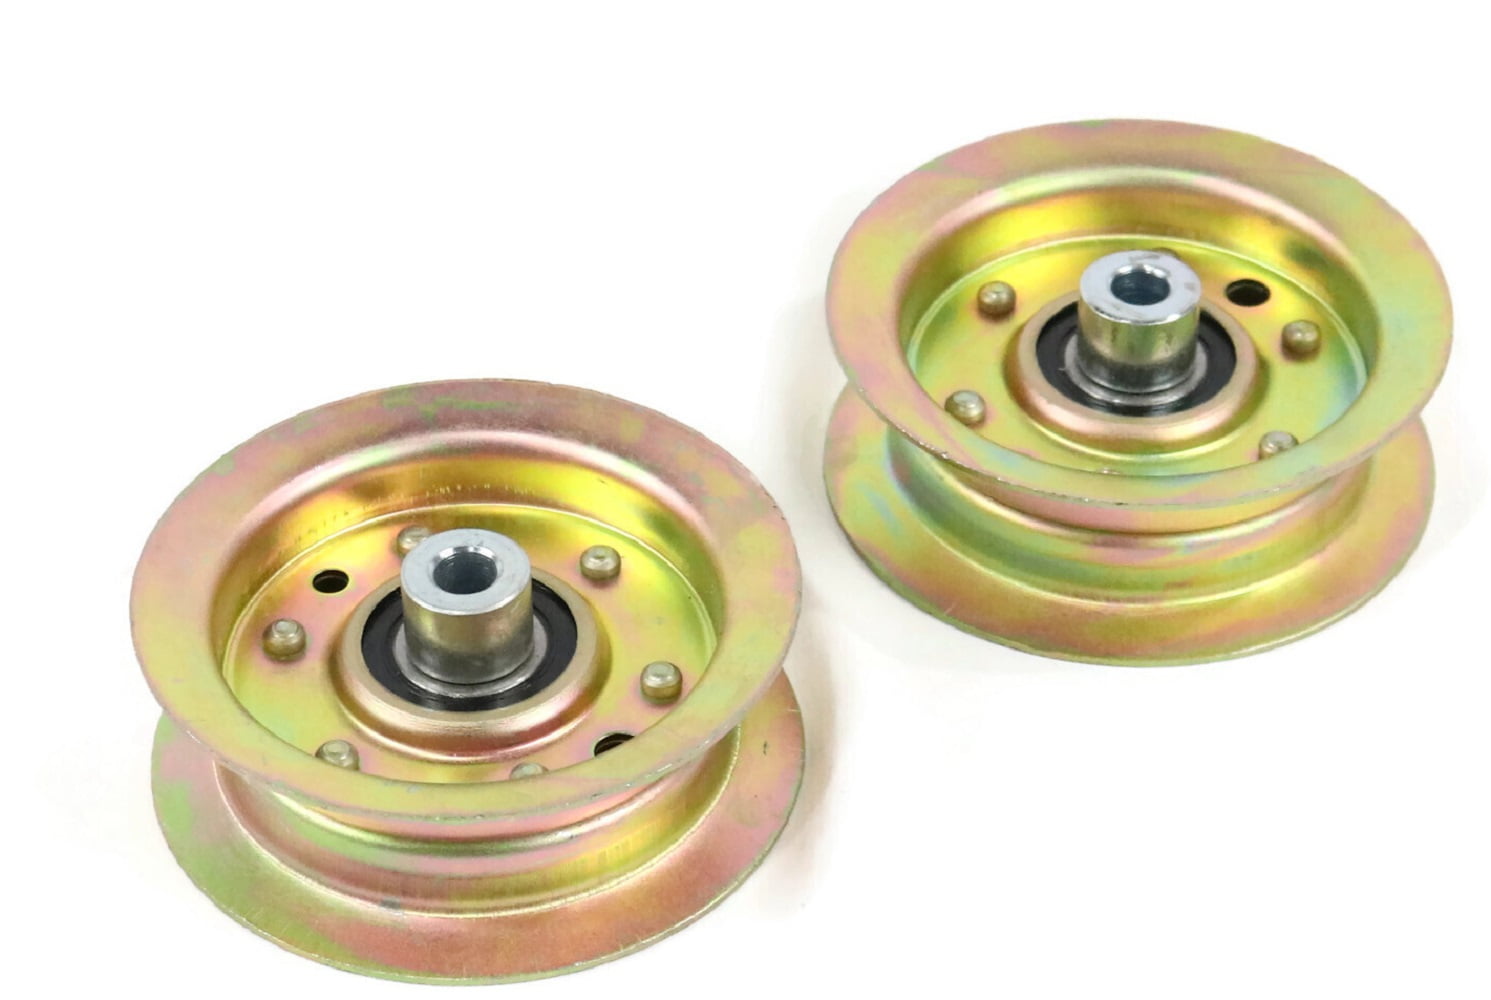 Flat Idler Pulley for 2010 & 2011 Toro Z Master Z500-74296 with 60" Deck Mower 